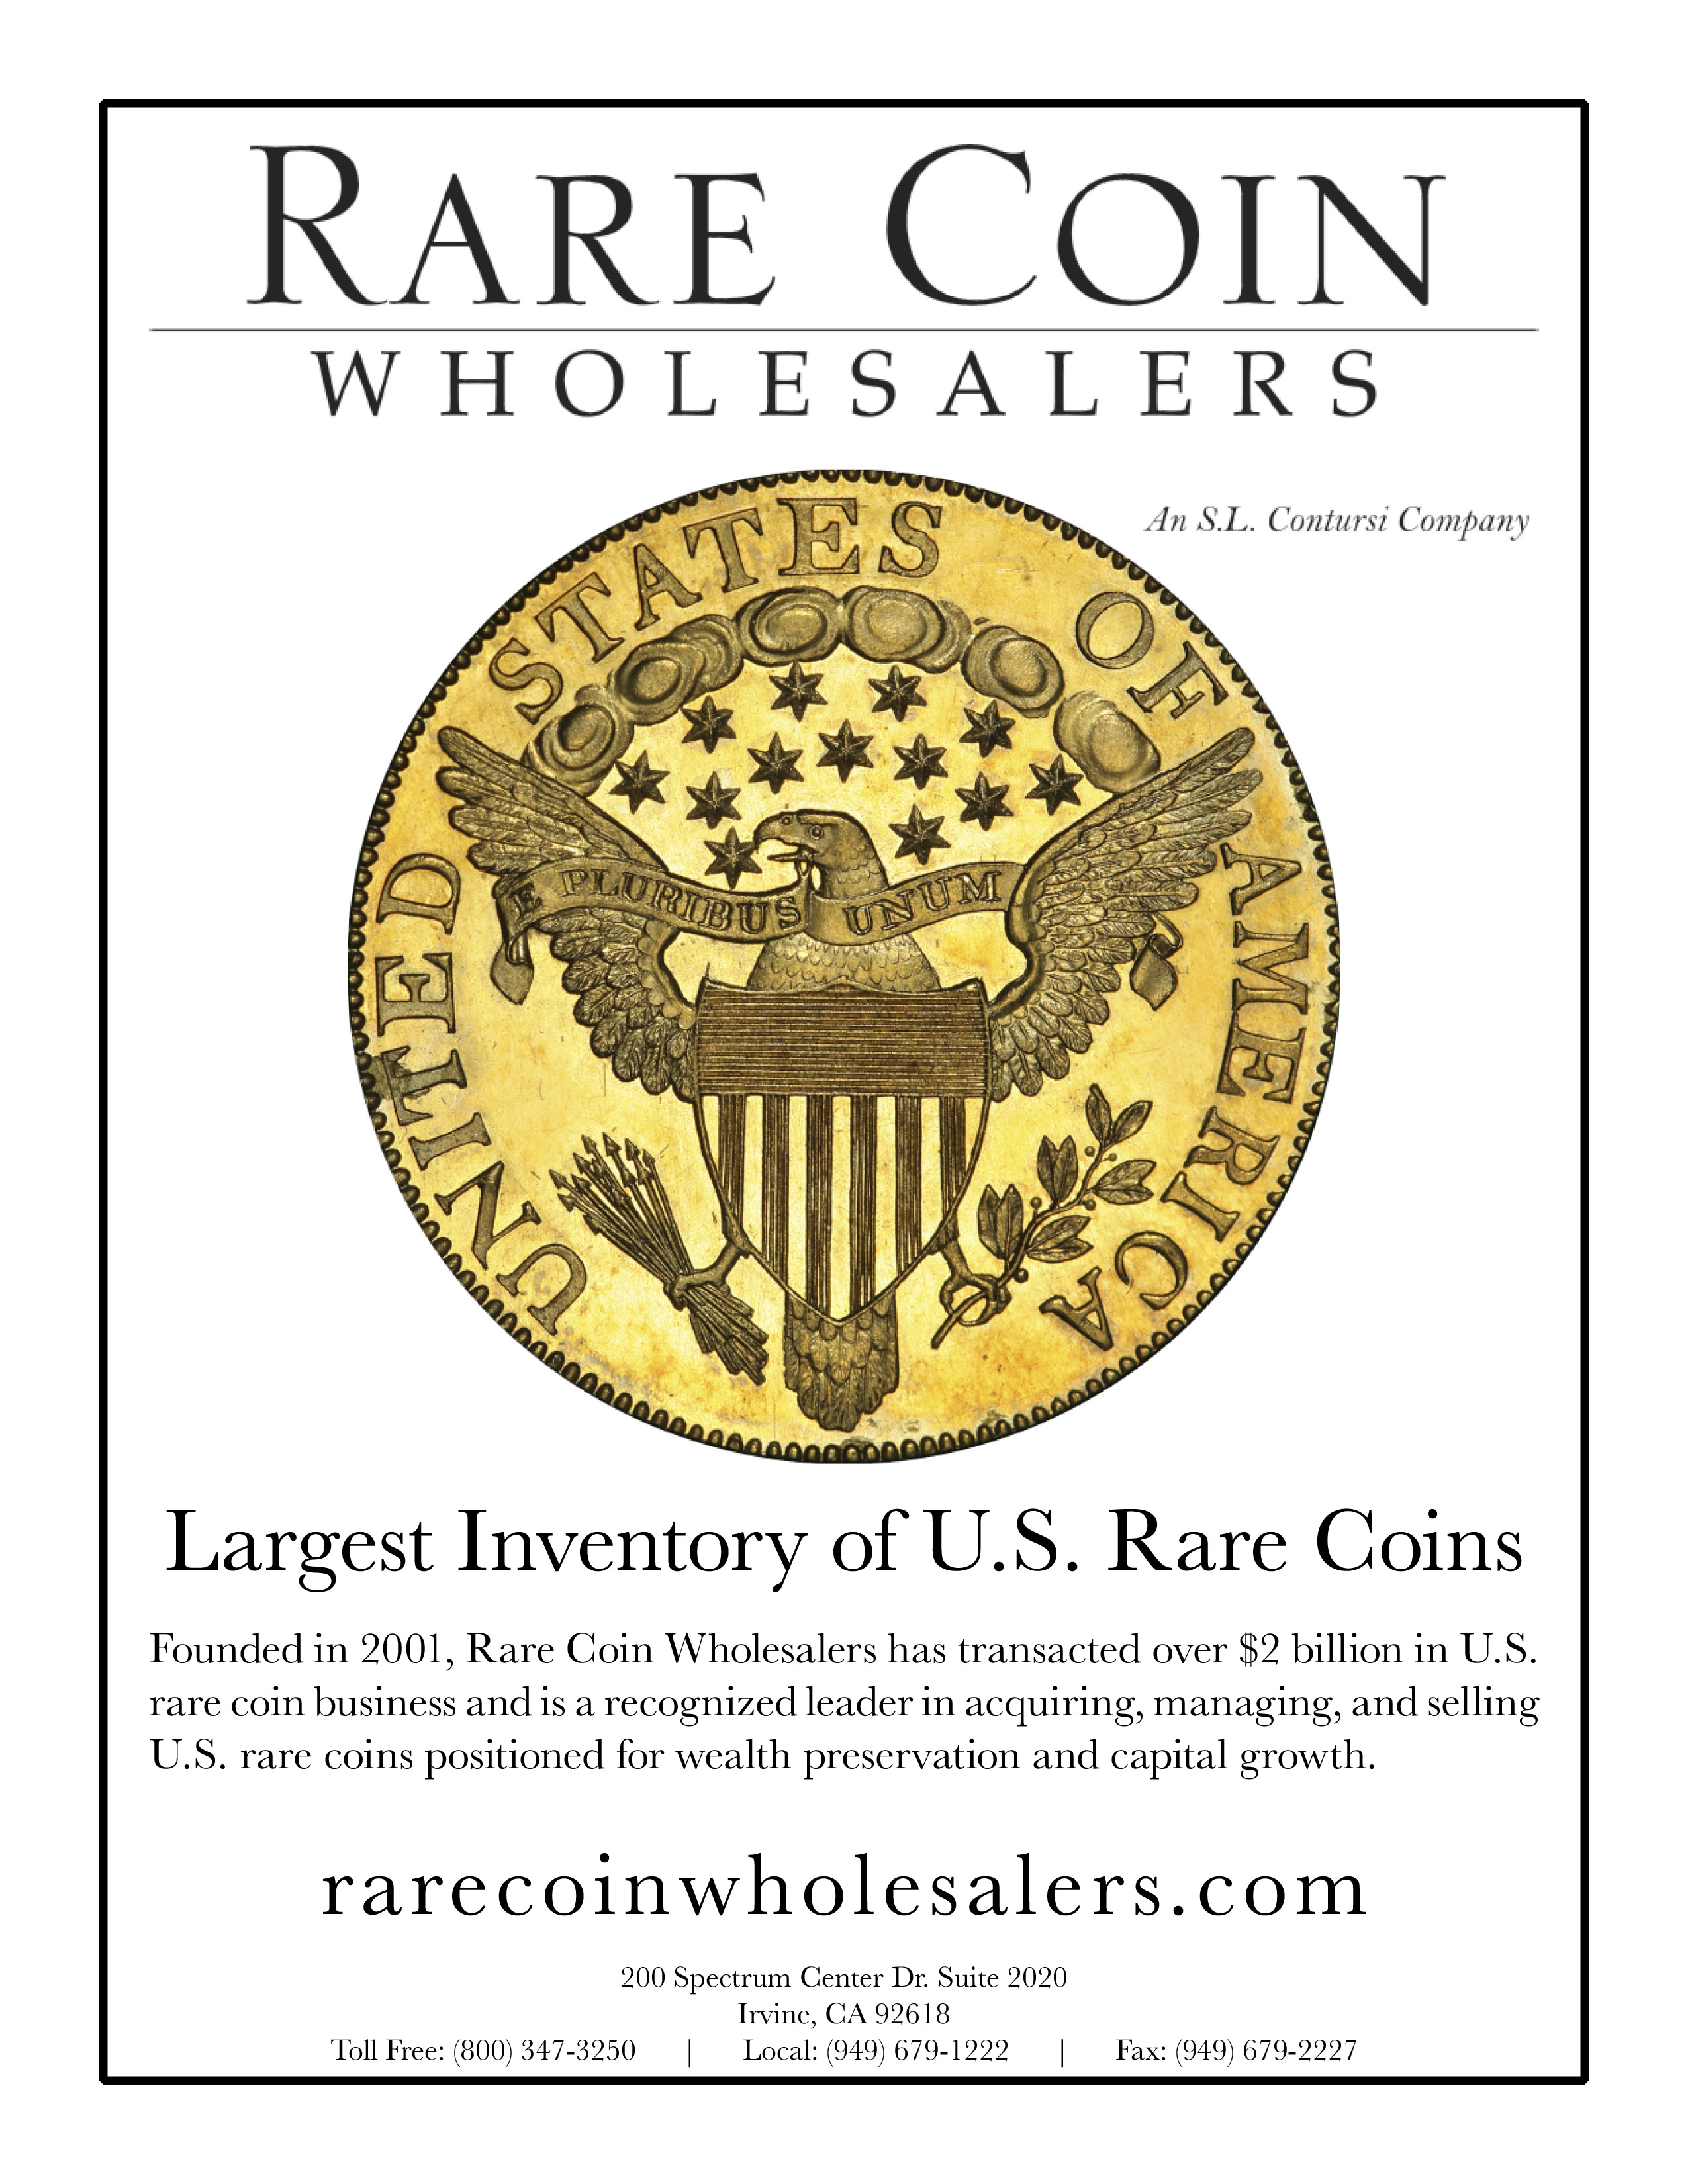 Rare Coin Wholesalers